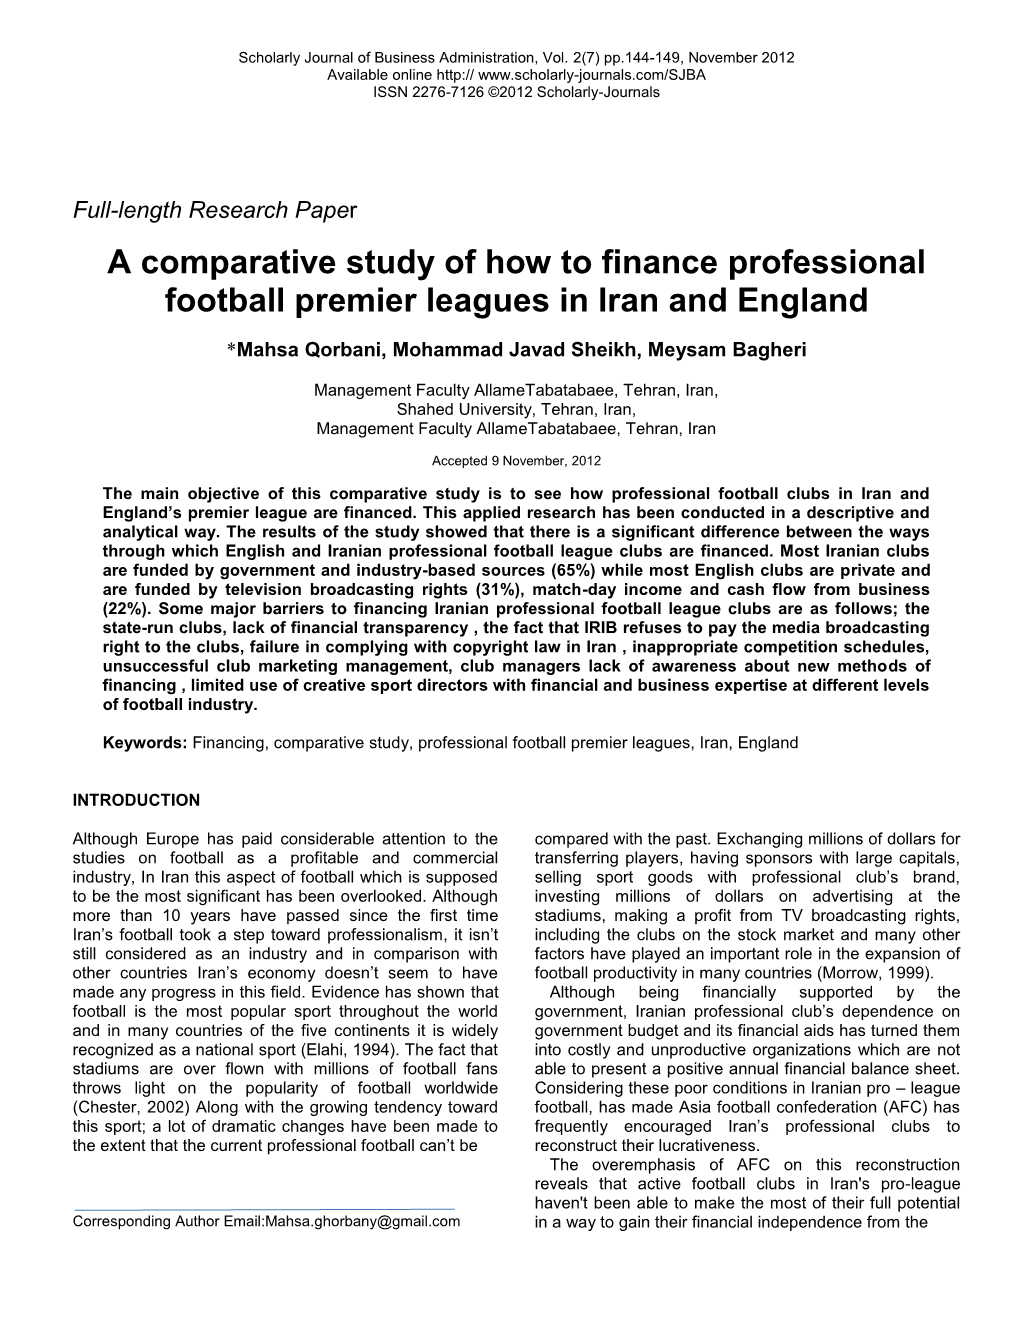 A Comparative Study of How to Finance Professional Football Premier Leagues in Iran and England